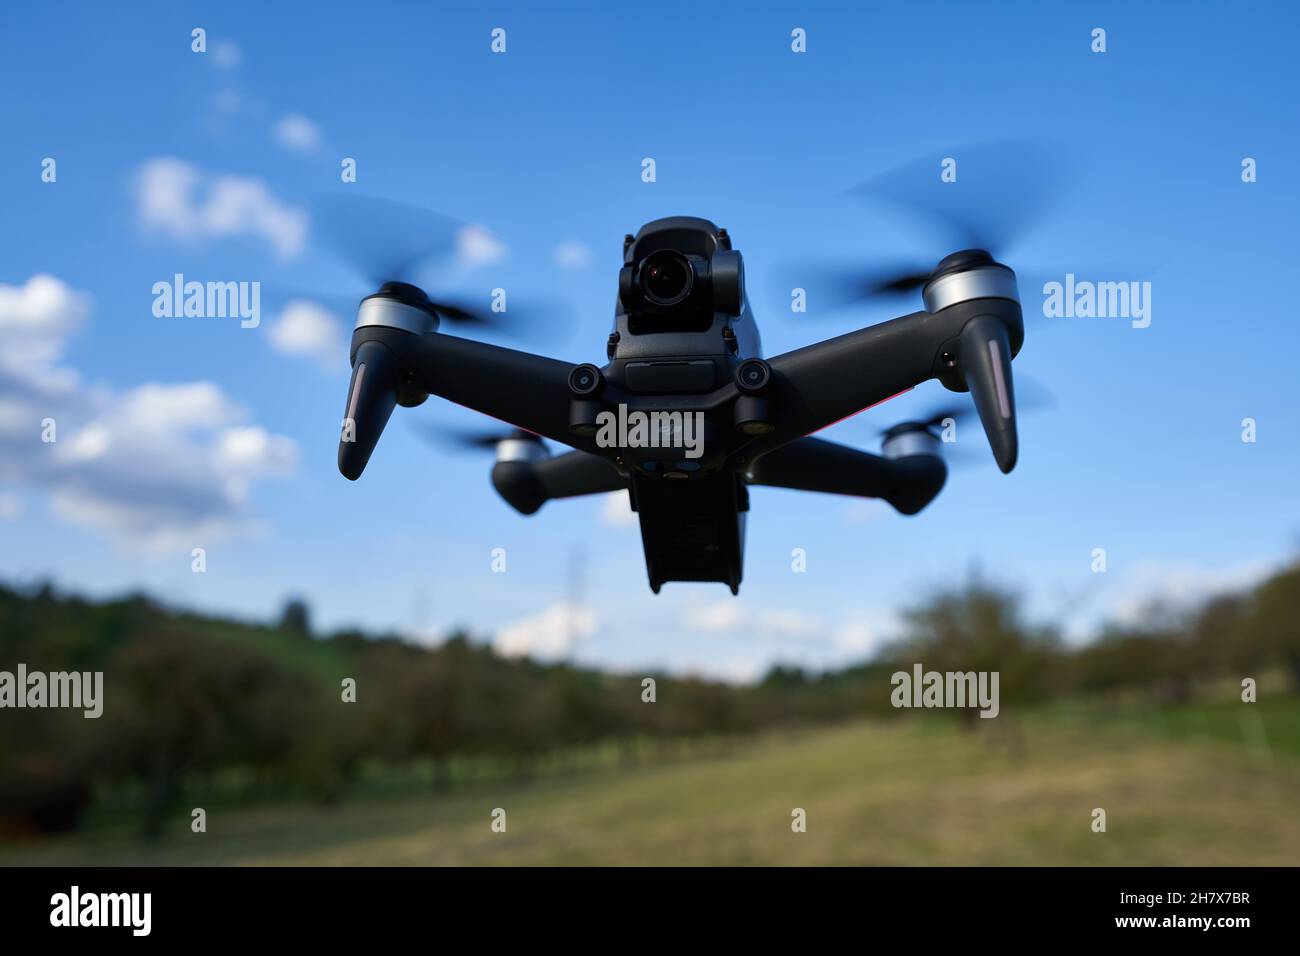 Nürtingen, Germany - June 26, 2021: Dji fpv drone flying over the mowed pasture. Black flying object with the latest technology. Up view. Stock Photo